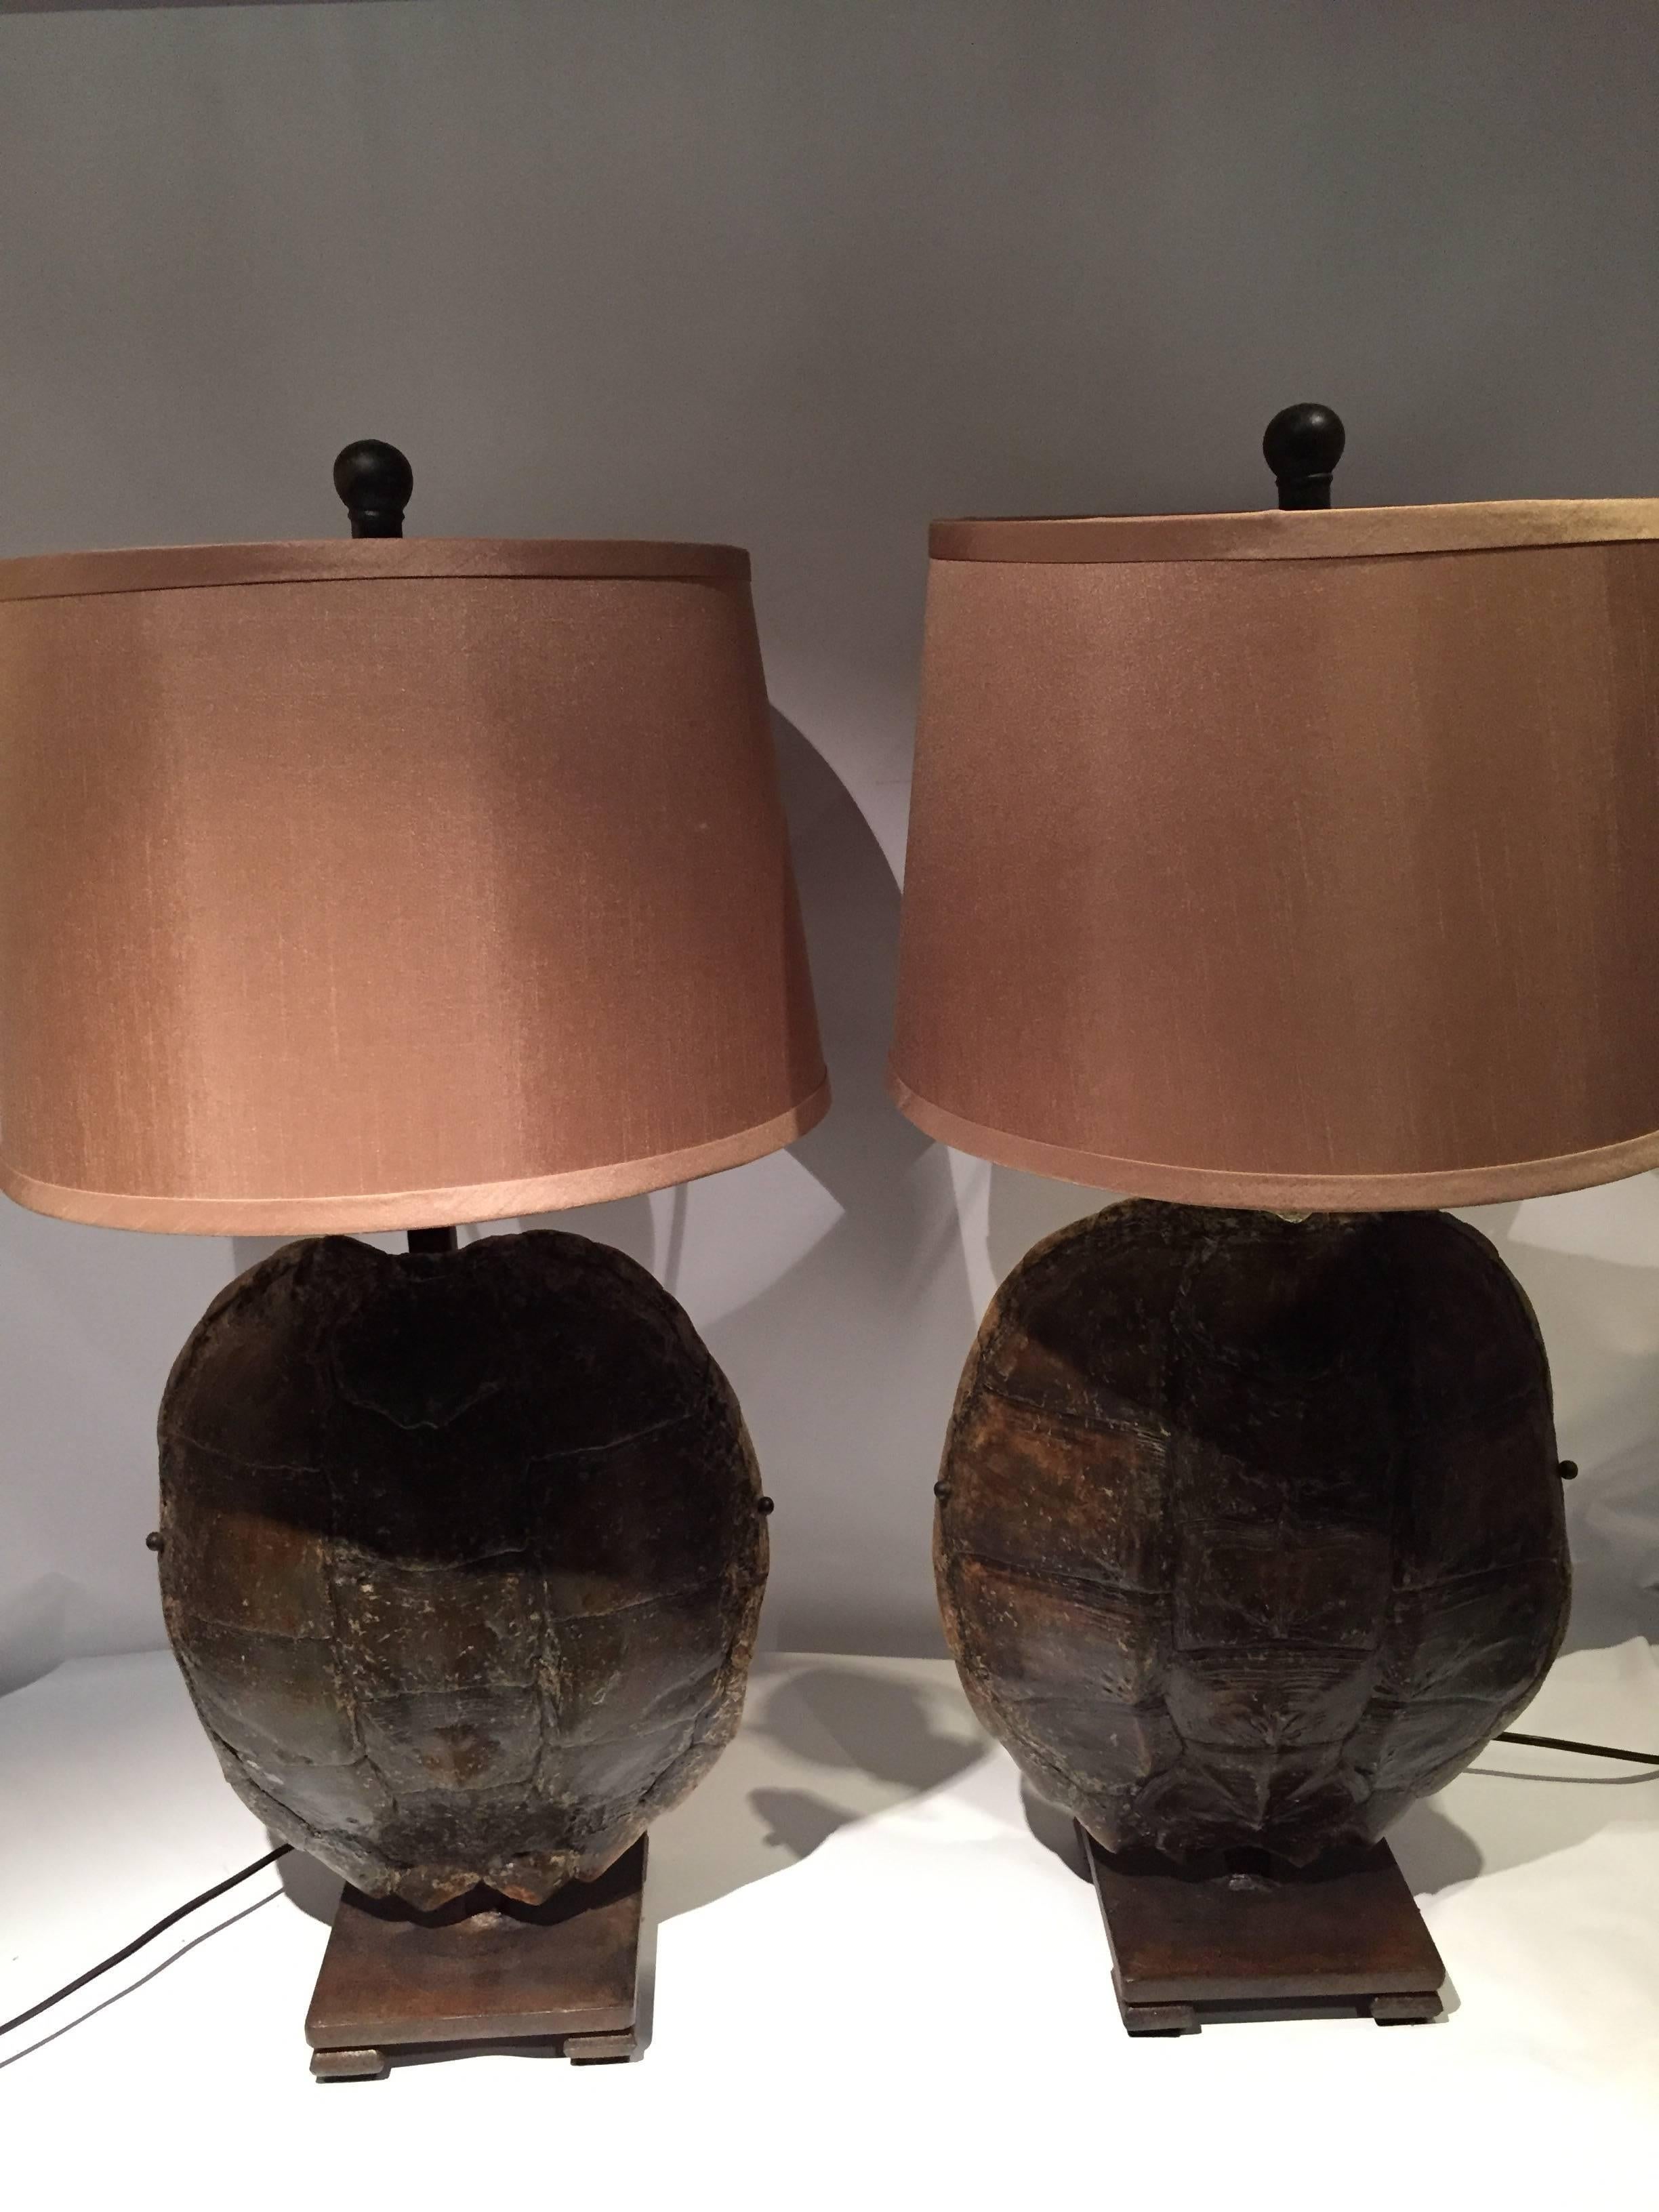 Beautiful pair of mounted turtle shell and iron lamps with tan silk lampshades. Electrified with a single light bulb socket.